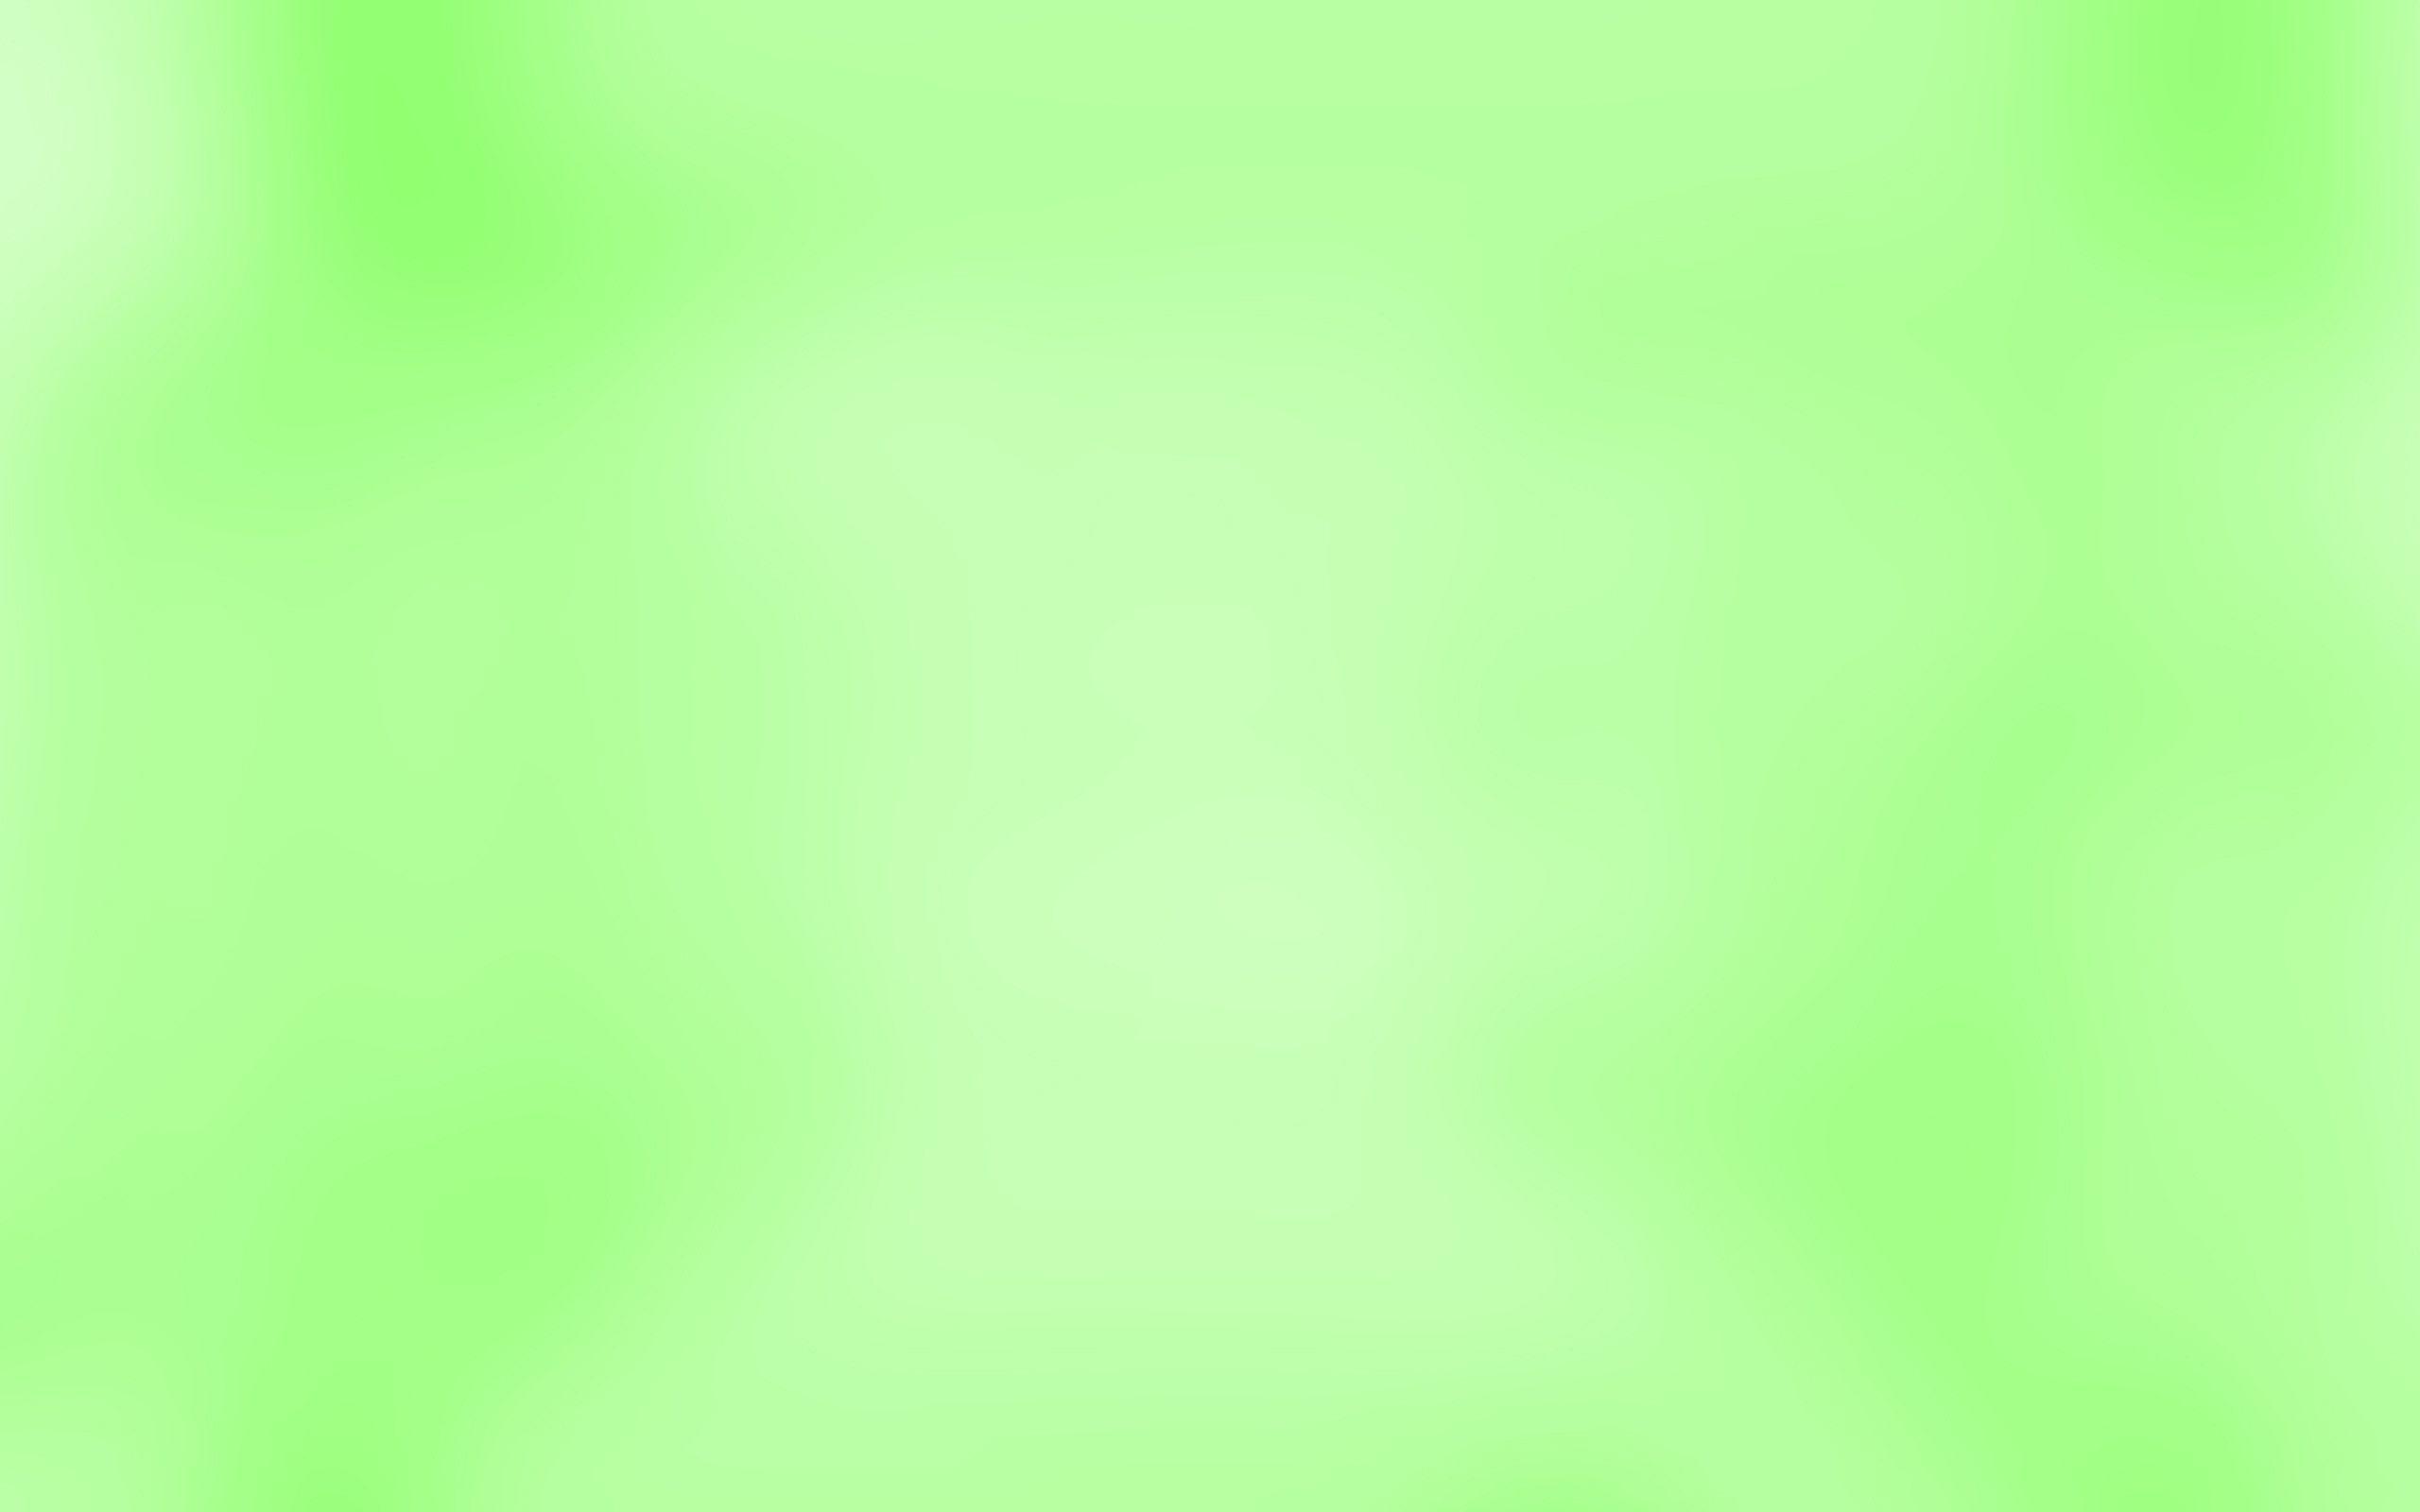 Green Background Images  Wallpapers Free Download  Fotor